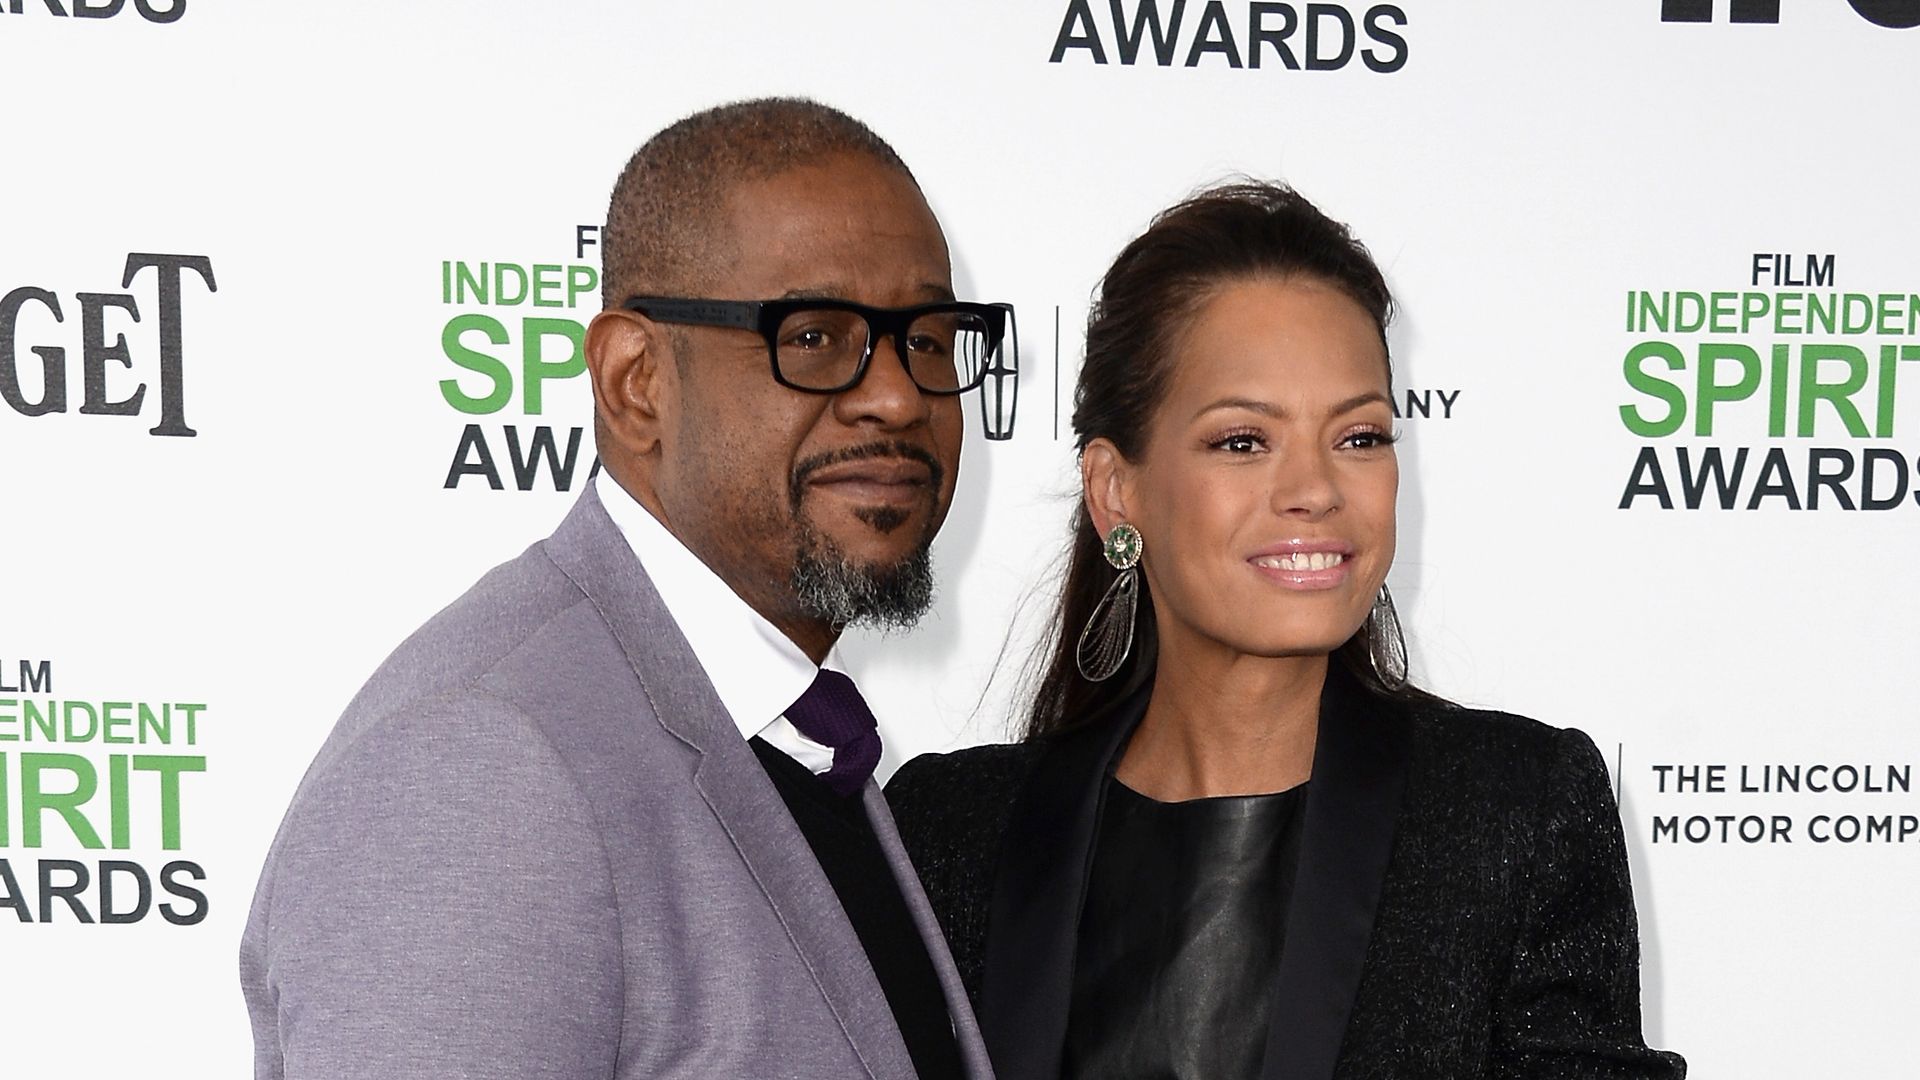 Forest Whitaker and Keisha Nash Whitaker attend the 2014 Film Independent Spirit Awards at Santa Monica Beach on March 1, 2014 in Santa Monica, California